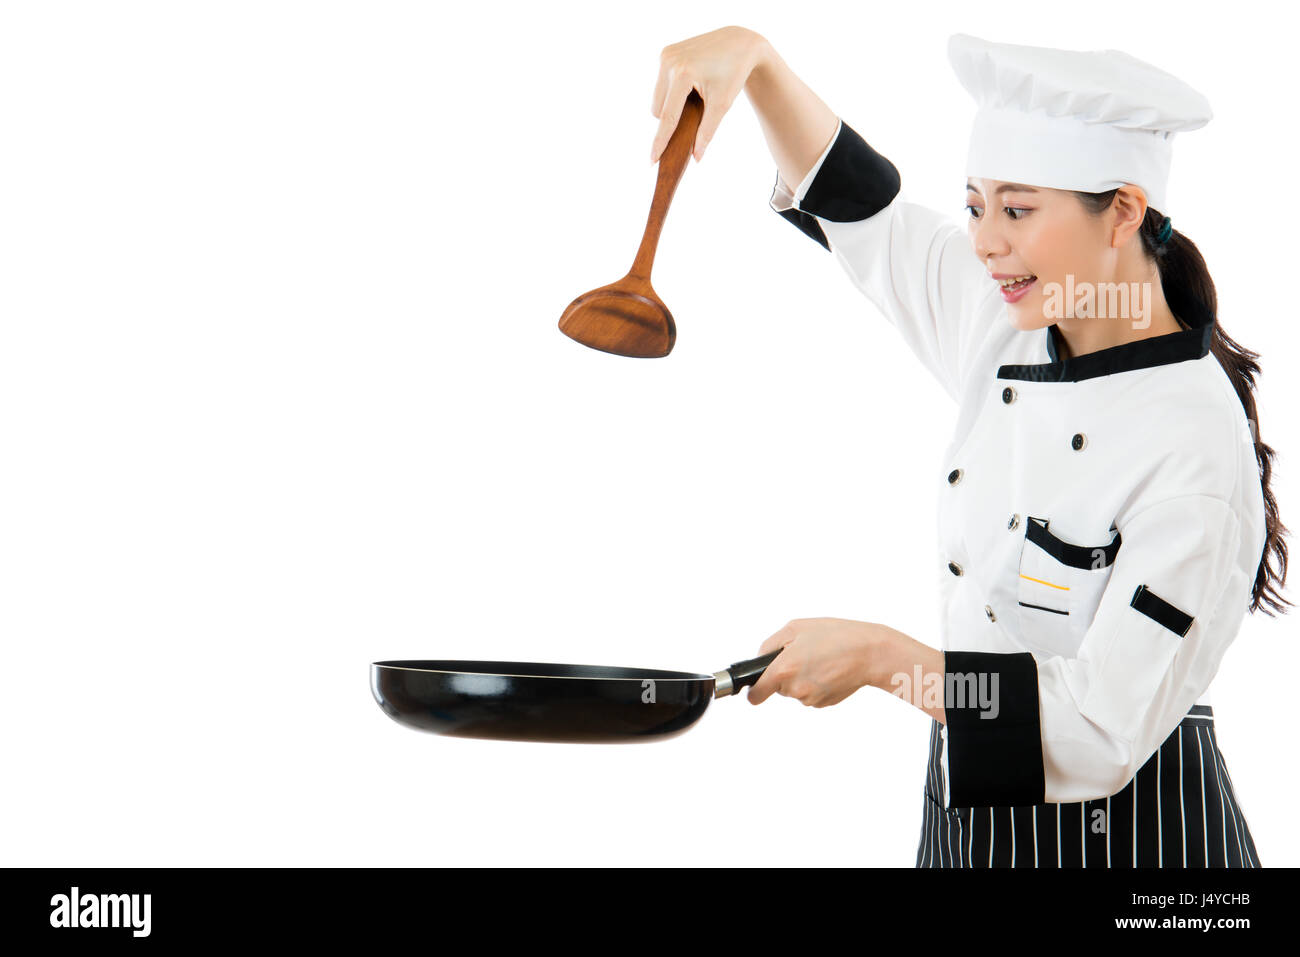 beautiful chef holding a wooden spatula in the air showing cooking gesture with copyspace and holding a pan smile standing on a white wall background. Stock Photo